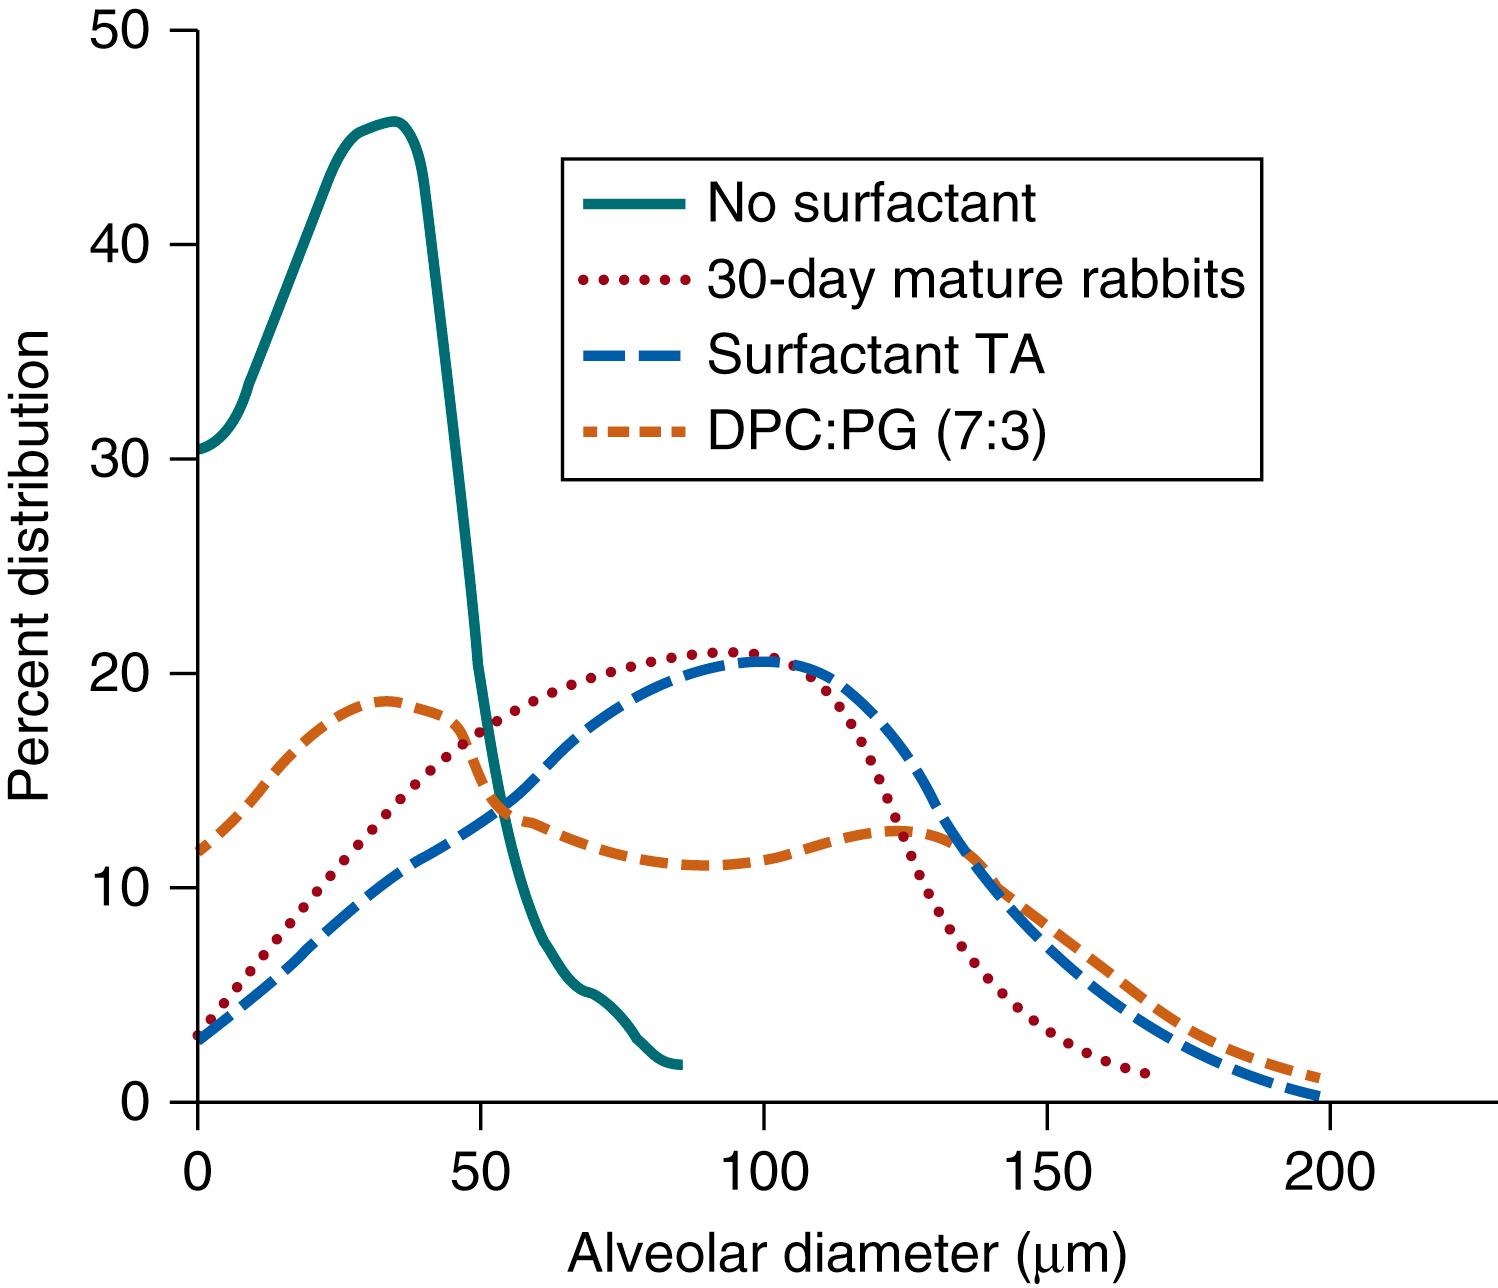 Fig. 79.2, Alveolar size distributions for 30-day-gestation mature rabbits, 27-day preterm rabbits receiving no surfactant, and preterm rabbits treated with a cow lung-derived surfactant or a dipalmitoylphosphatidylcholine:phosphatidylglycerol synthetic surfactant (DPC:PG) (lipid only synthetic surfactant). Surfactant treatment normalized alveolar diameters toward those measured for the mature newborn rabbits.